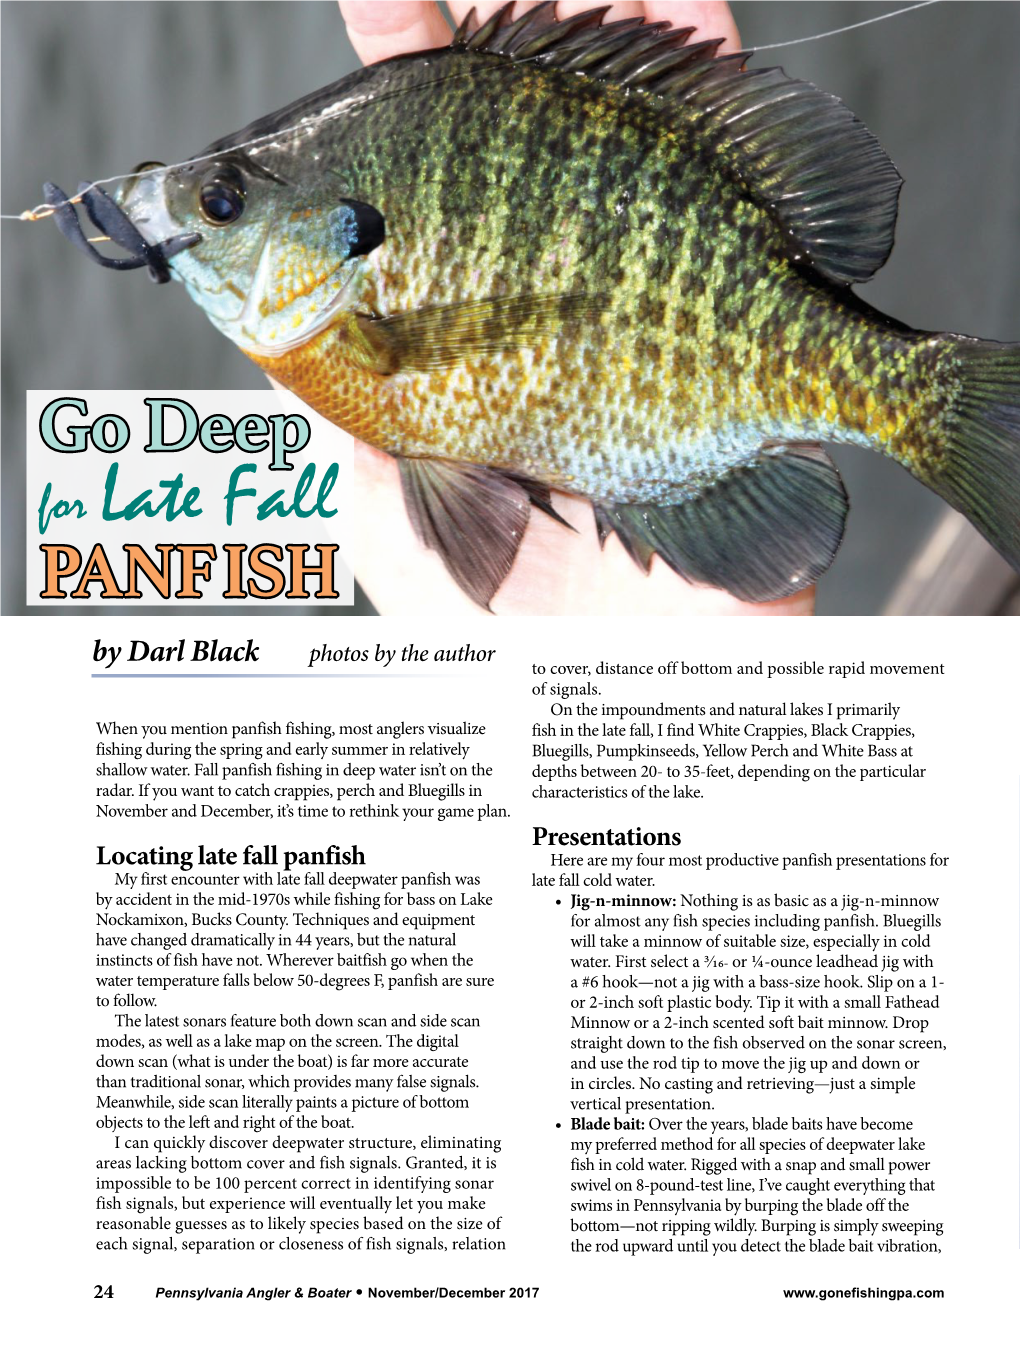 Go Deep for Late Fall PANFISH Photos by the Author by Darl Black to Cover, Distance Off Bottom and Possible Rapid Movement of Signals